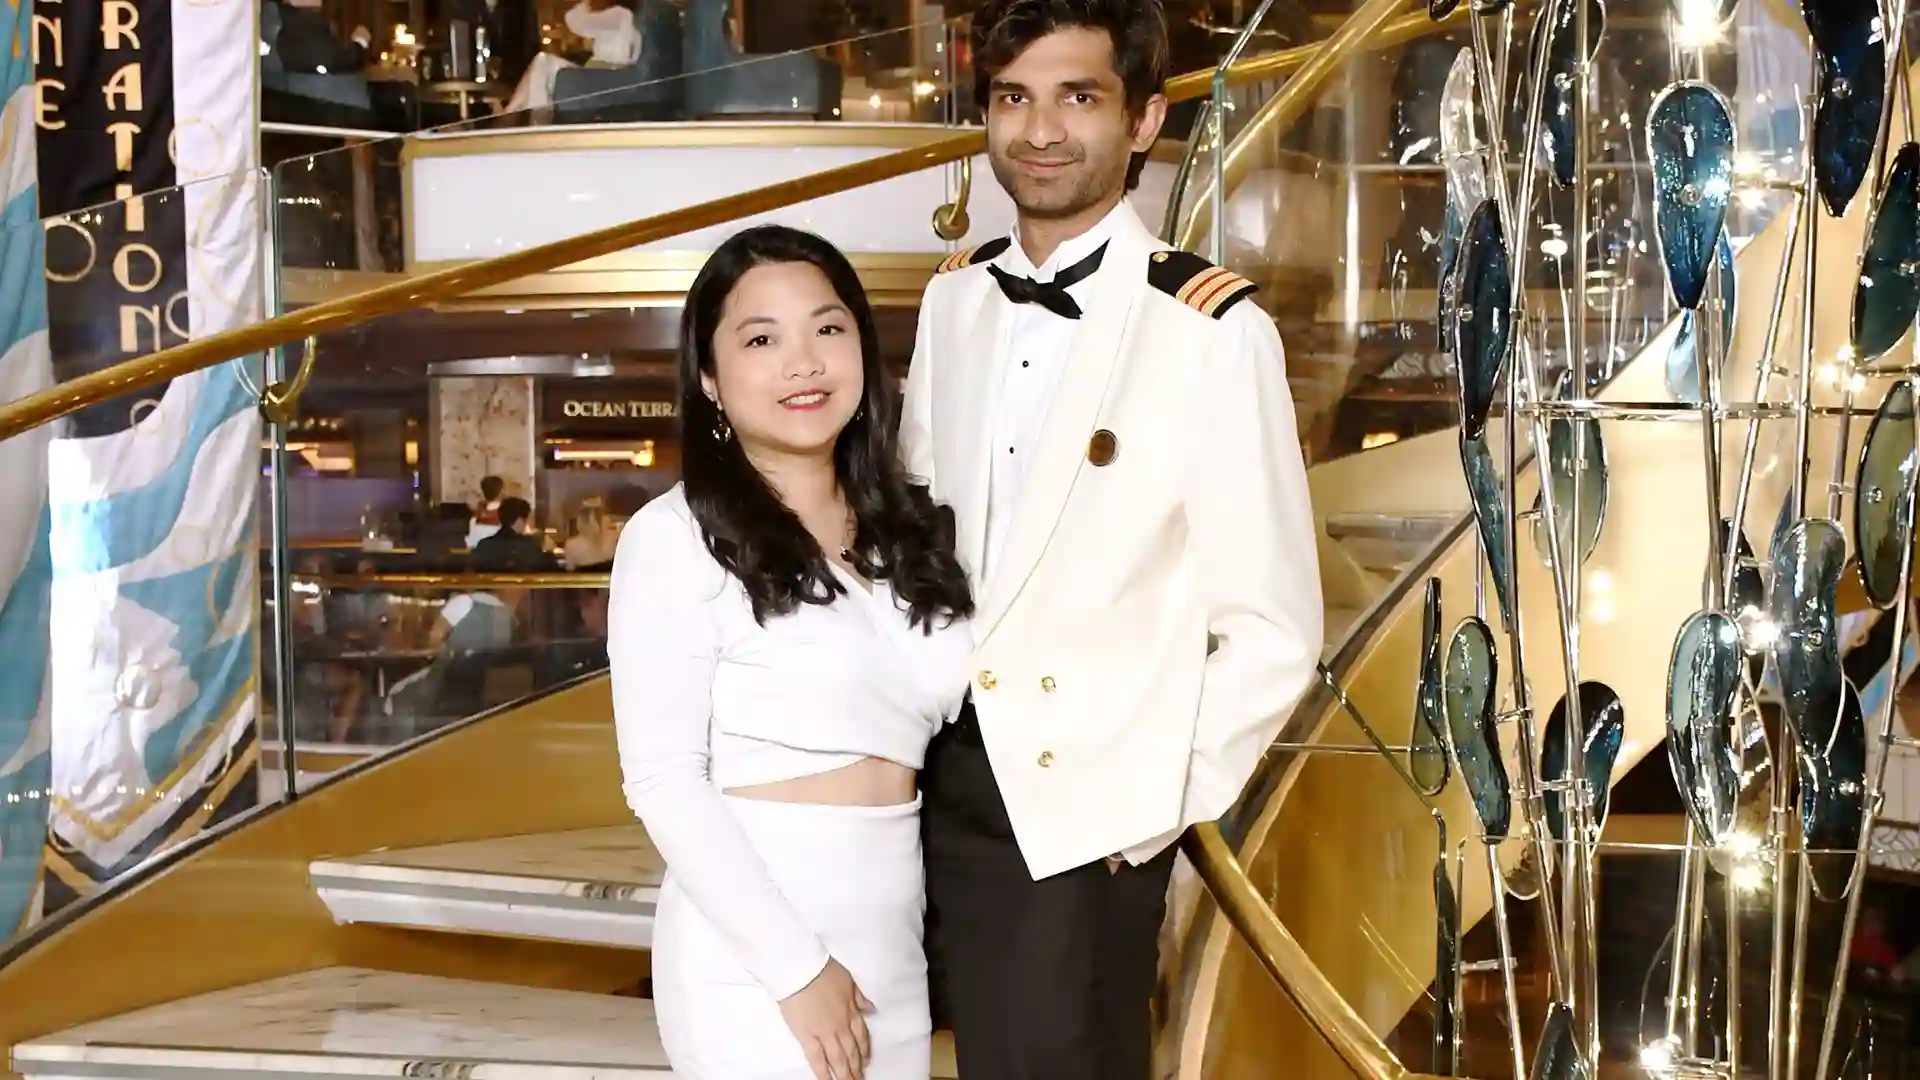 View of couple in white formal attire on Holland America Line cruise, standing on staircase for engagement photo.